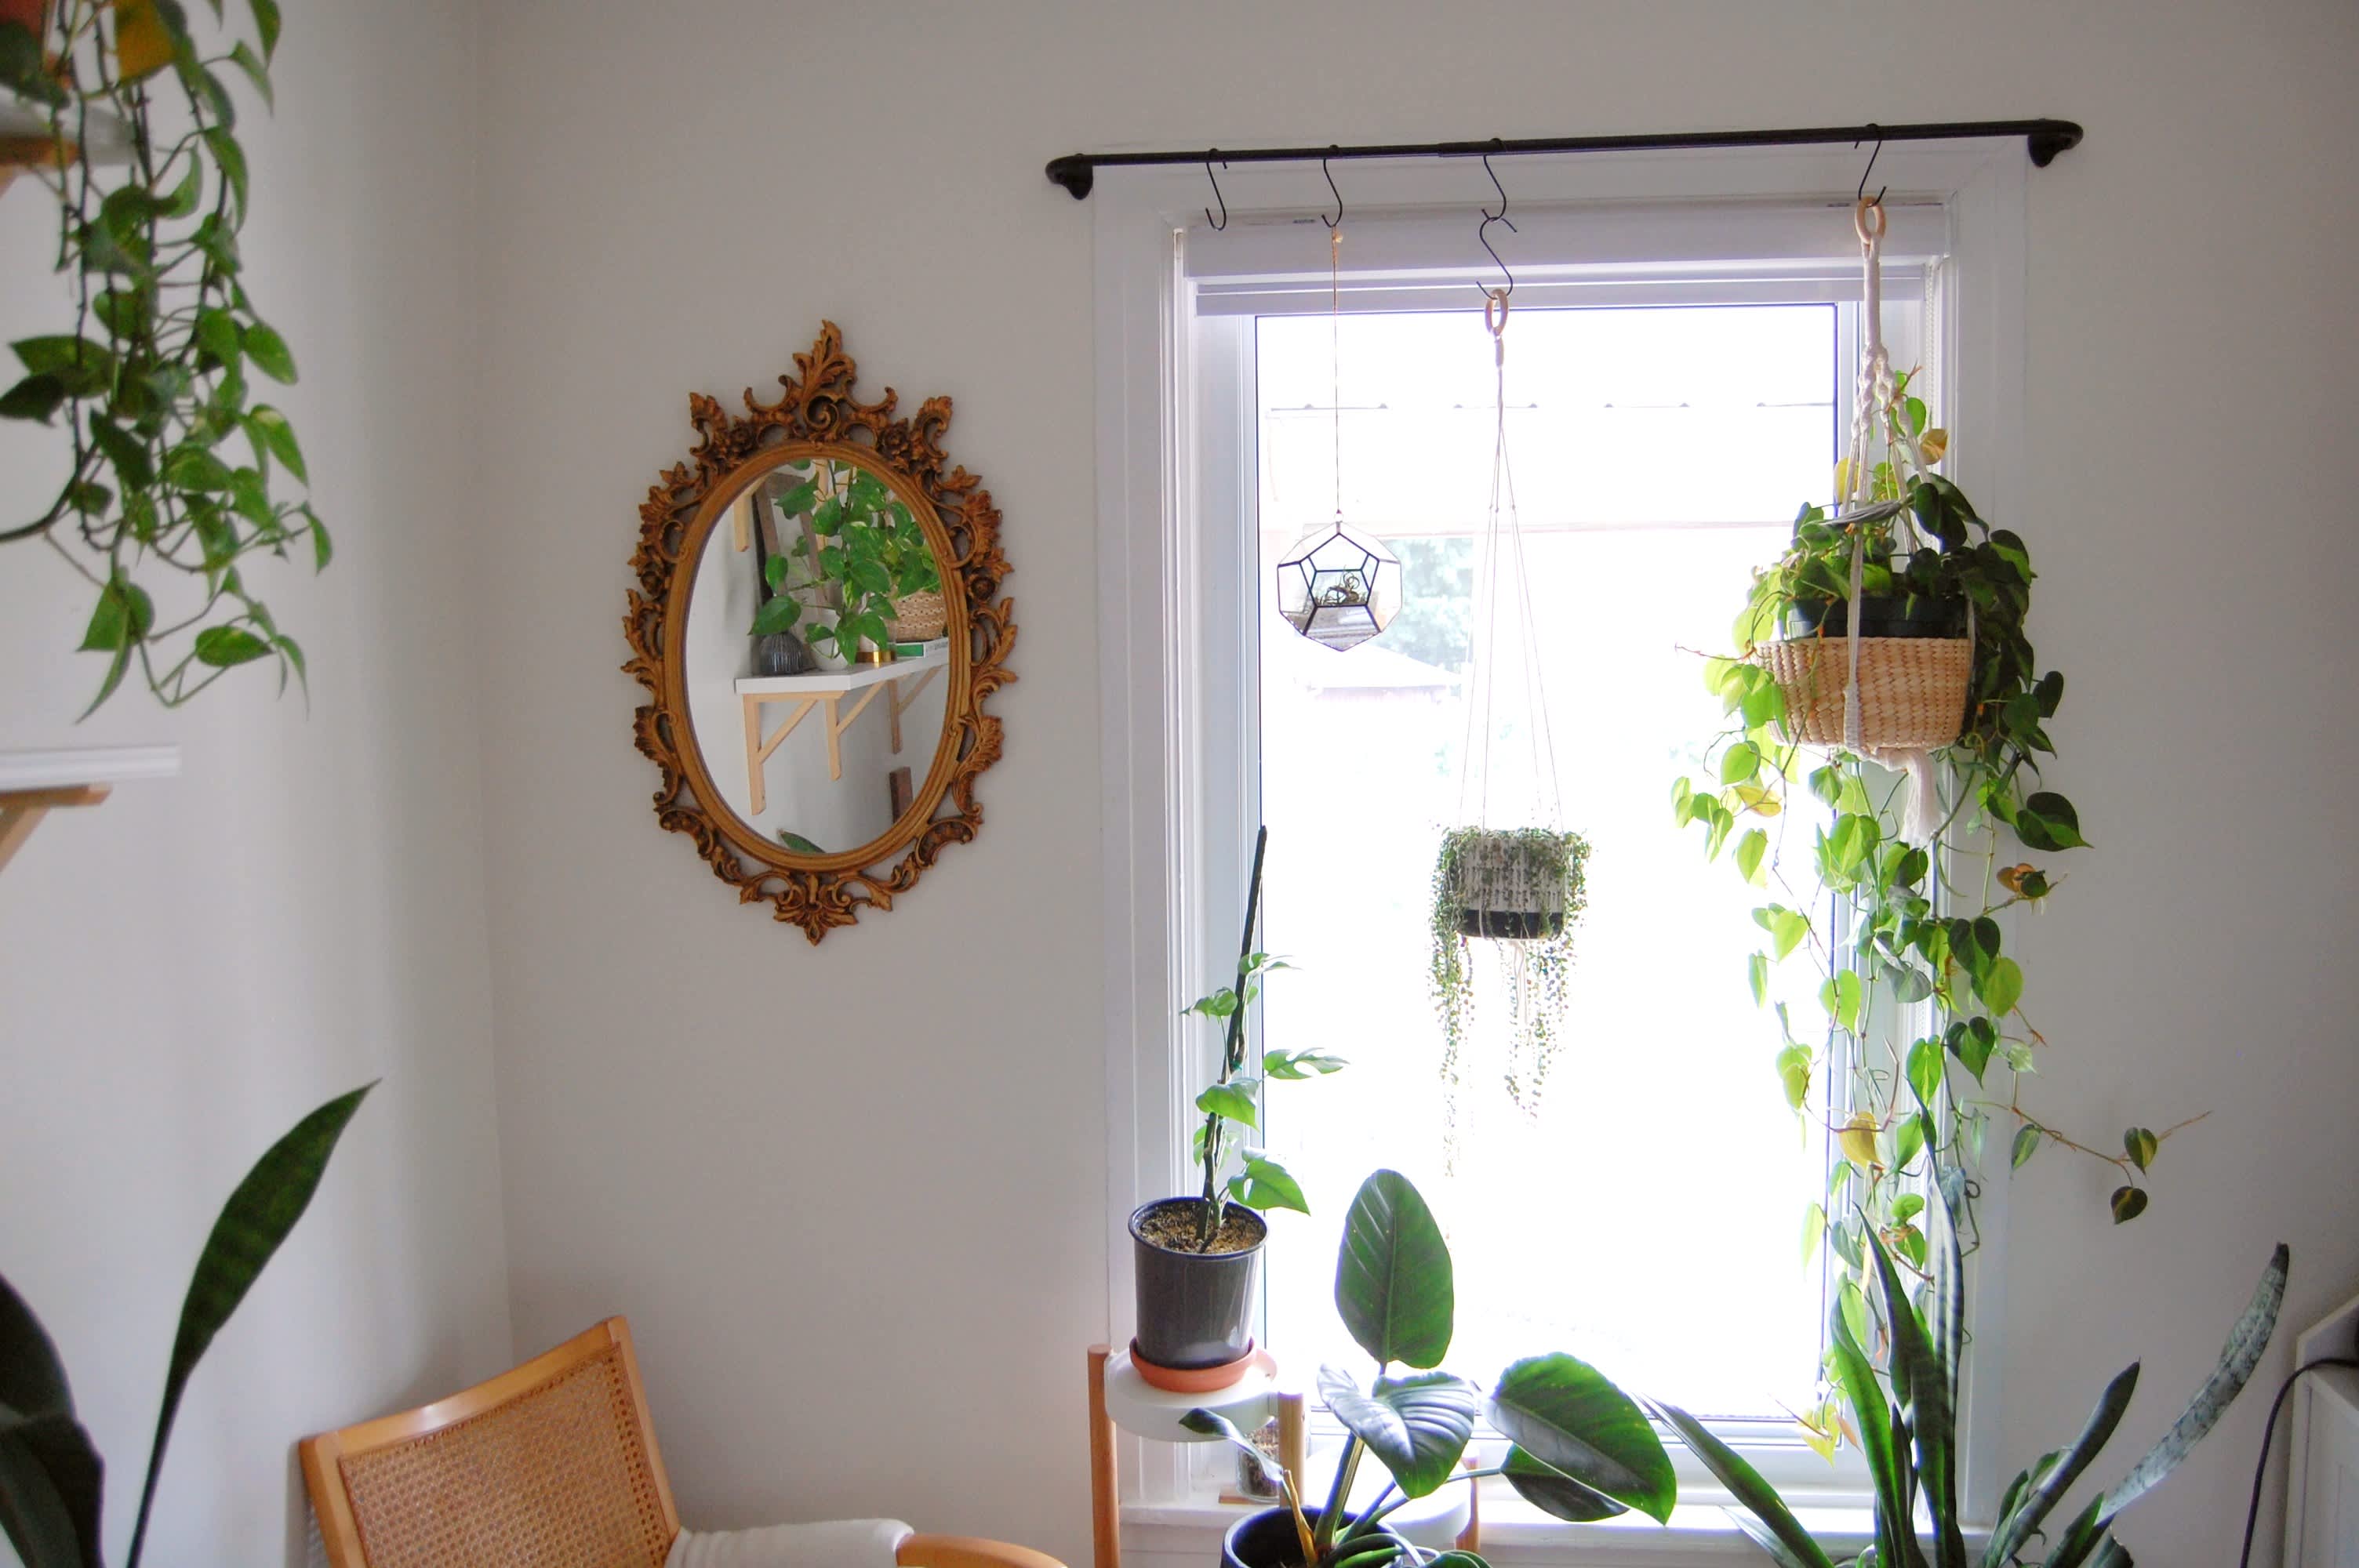 How to Hang Plants in Your Rental Apartment and Get Your Security